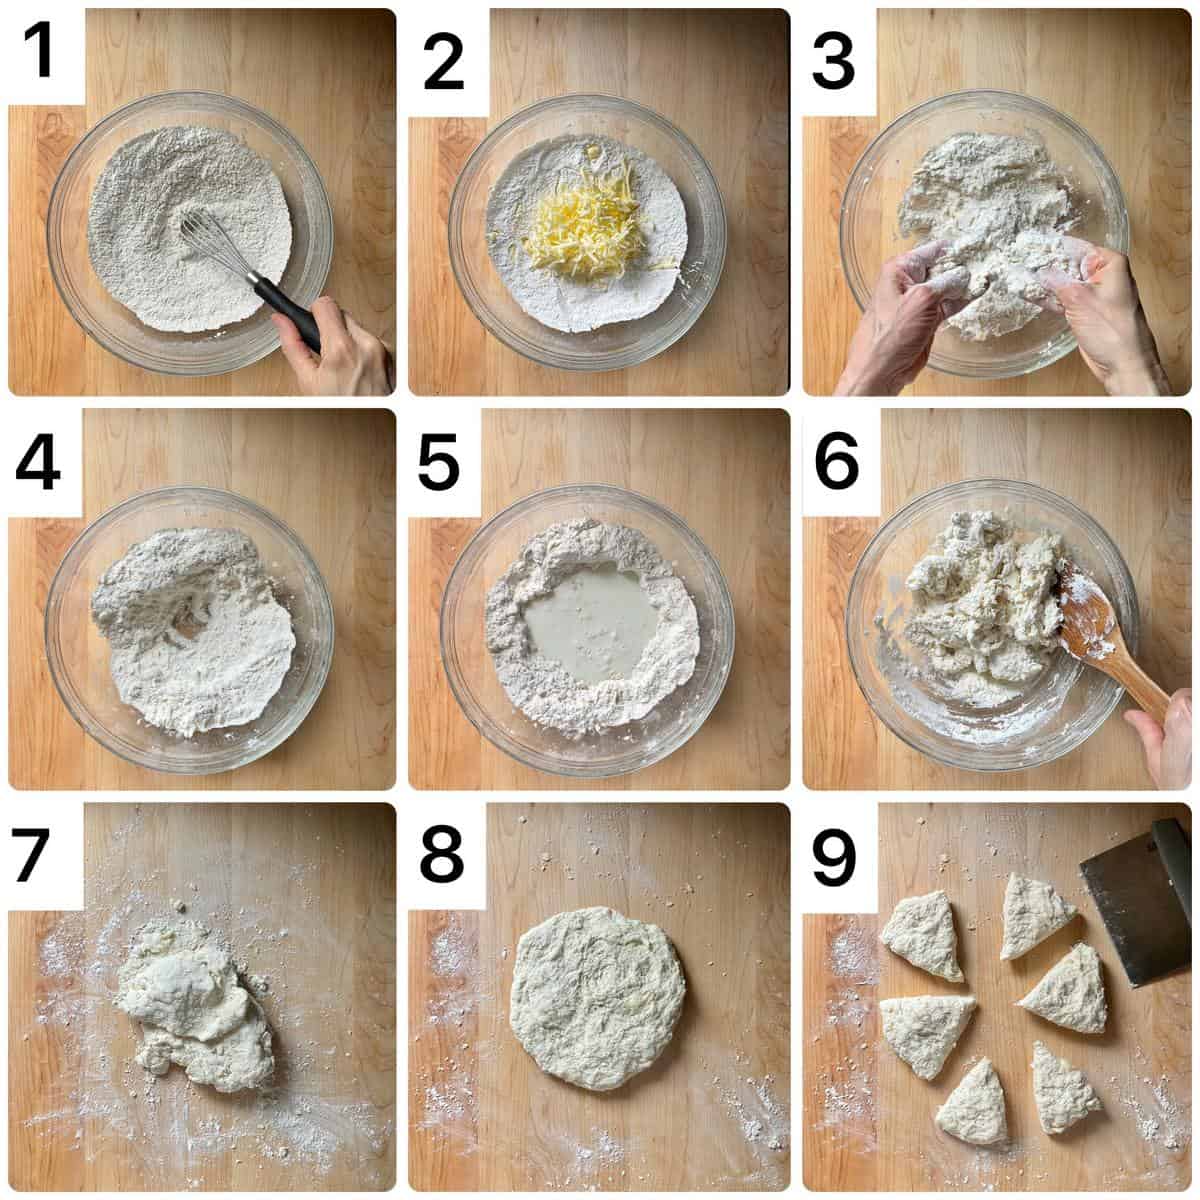 A photo collage of the biscuit ingredients being combined.